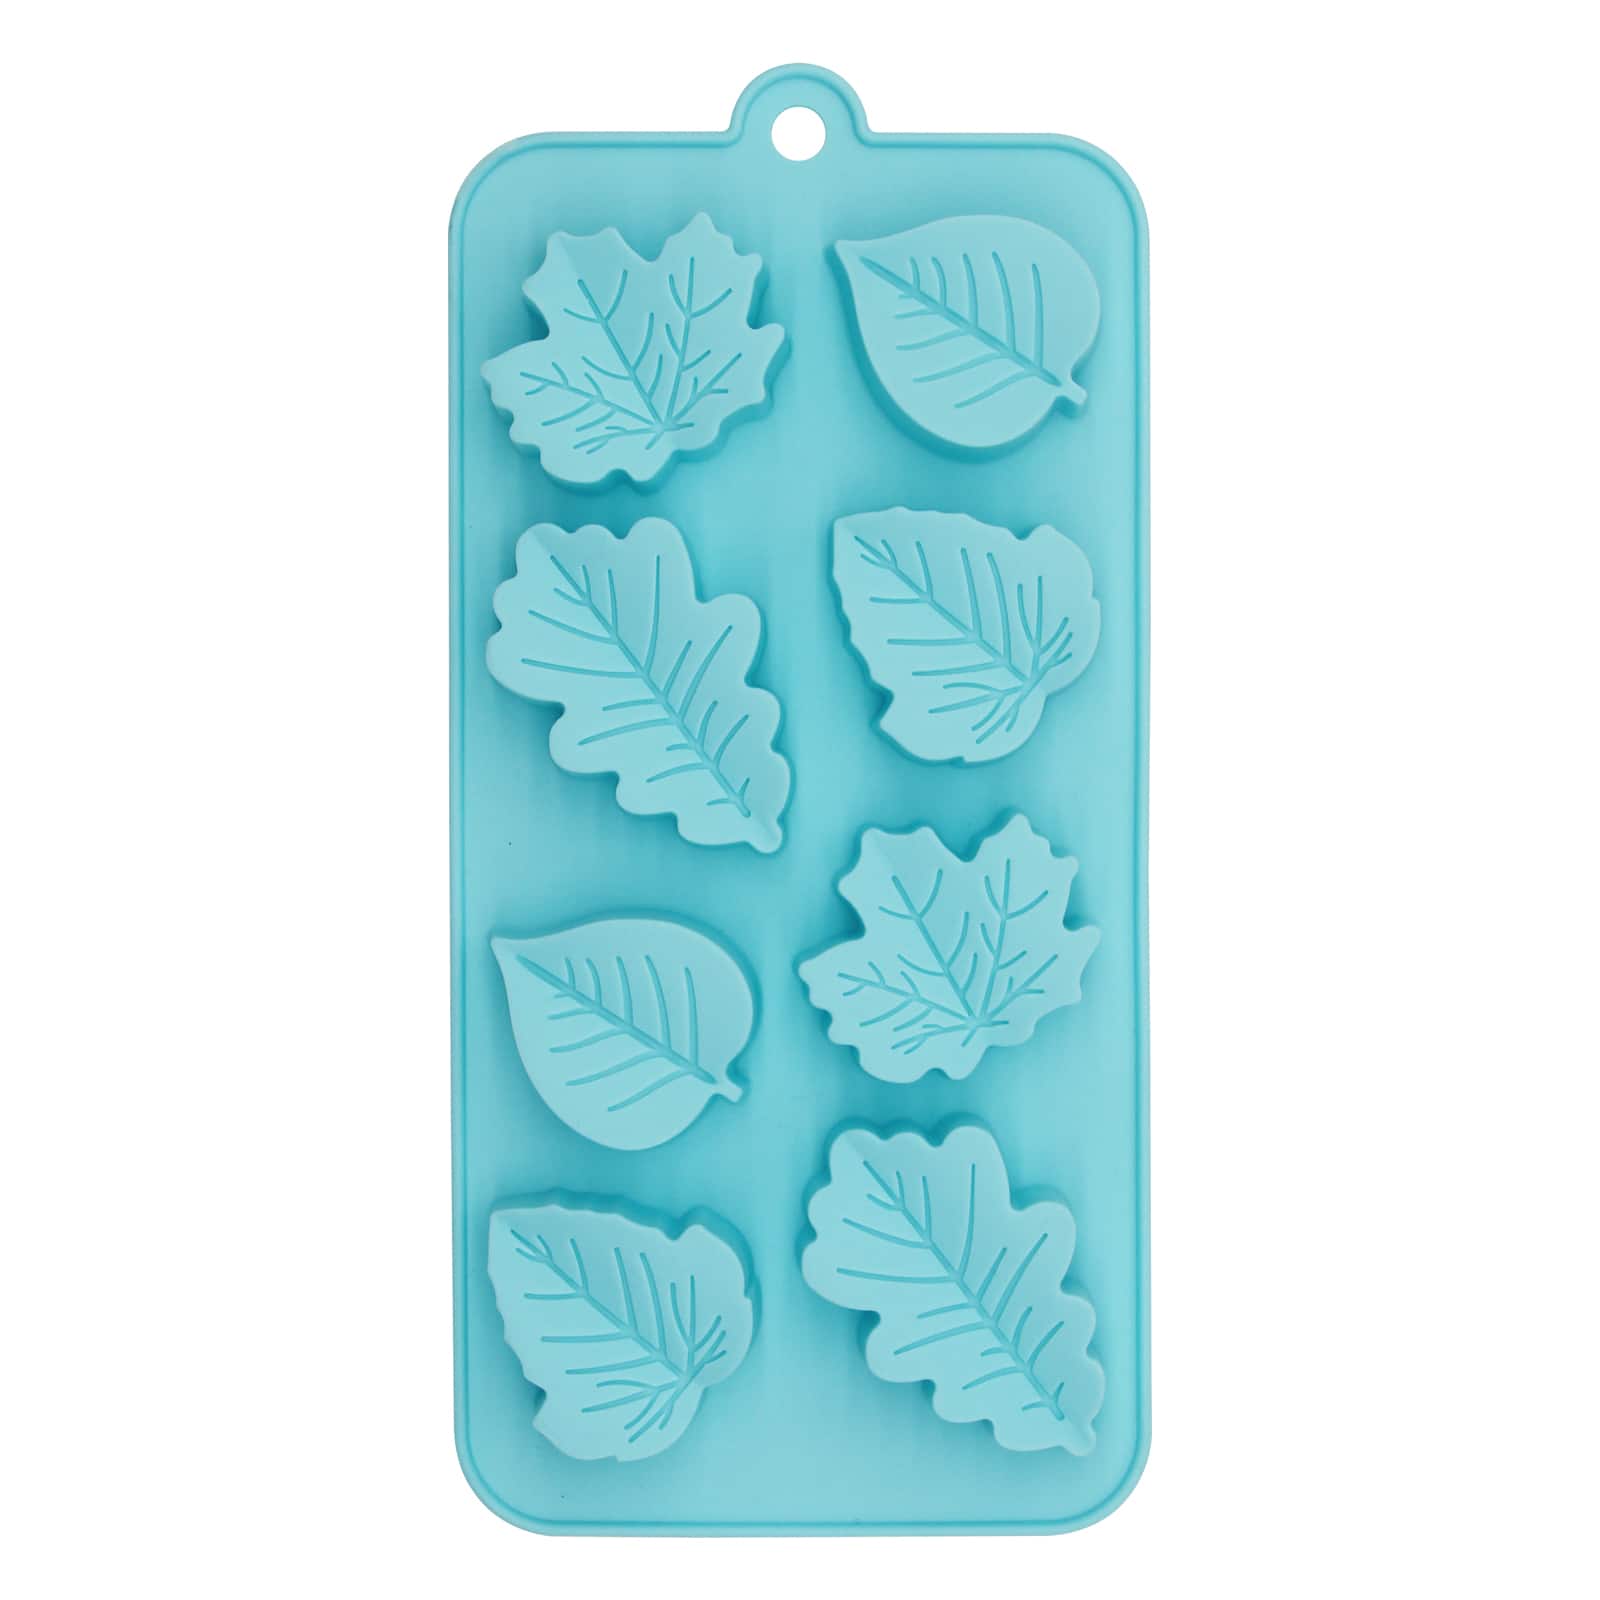 Leaf Chocolate Silicone Mold, Molds Chocolate Leaves